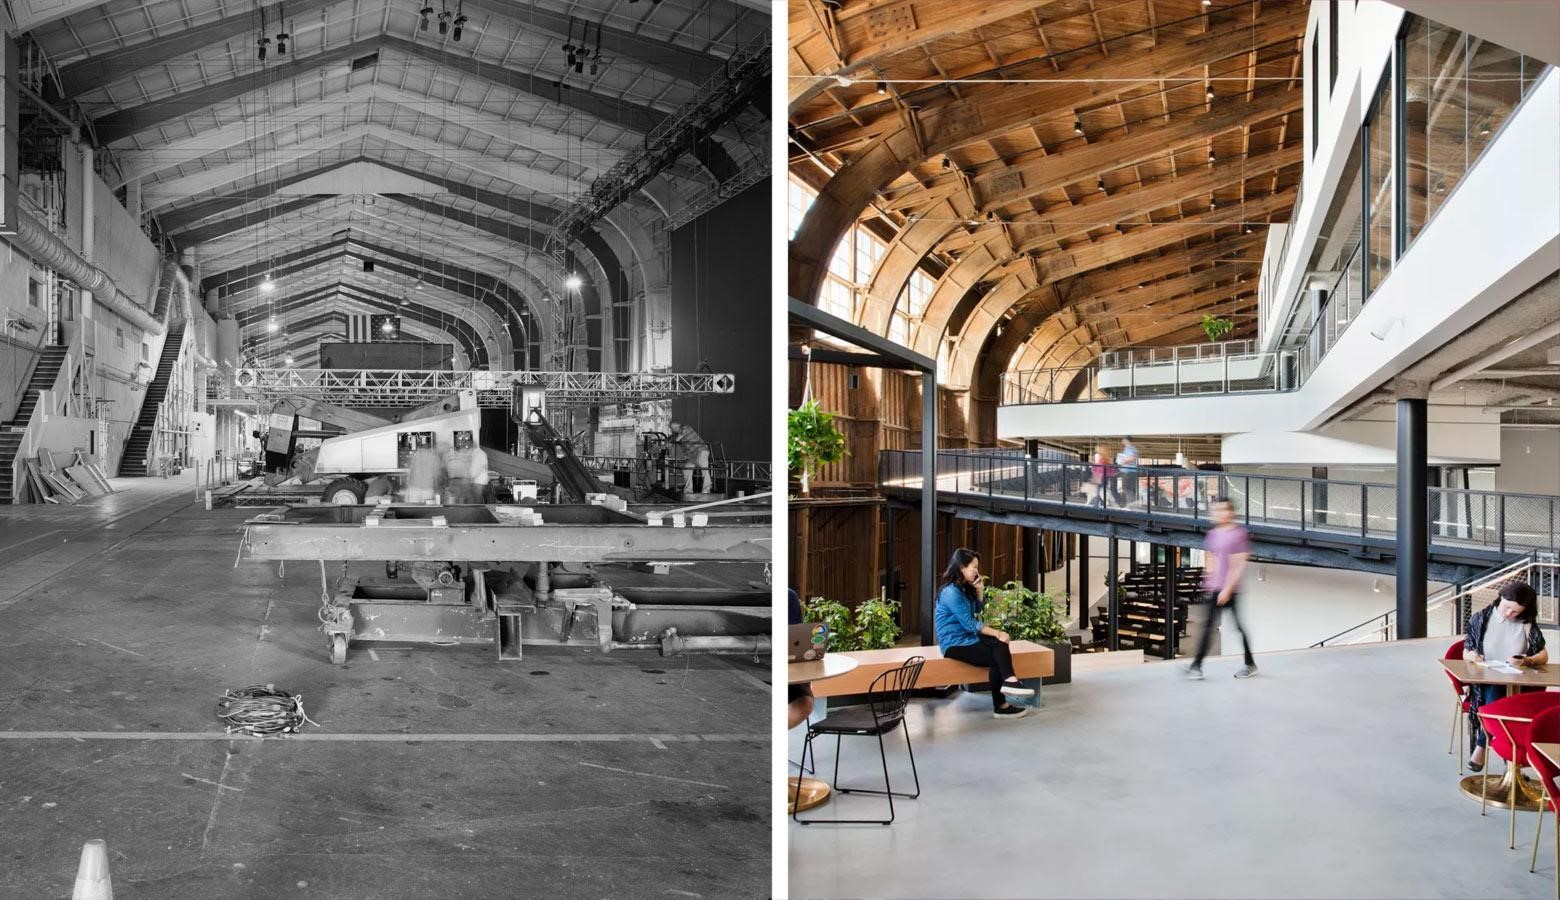 Revitalizing Aging Infrastructure: Strategies for Adaptive Reuse of Historic Buildings - Sheet3